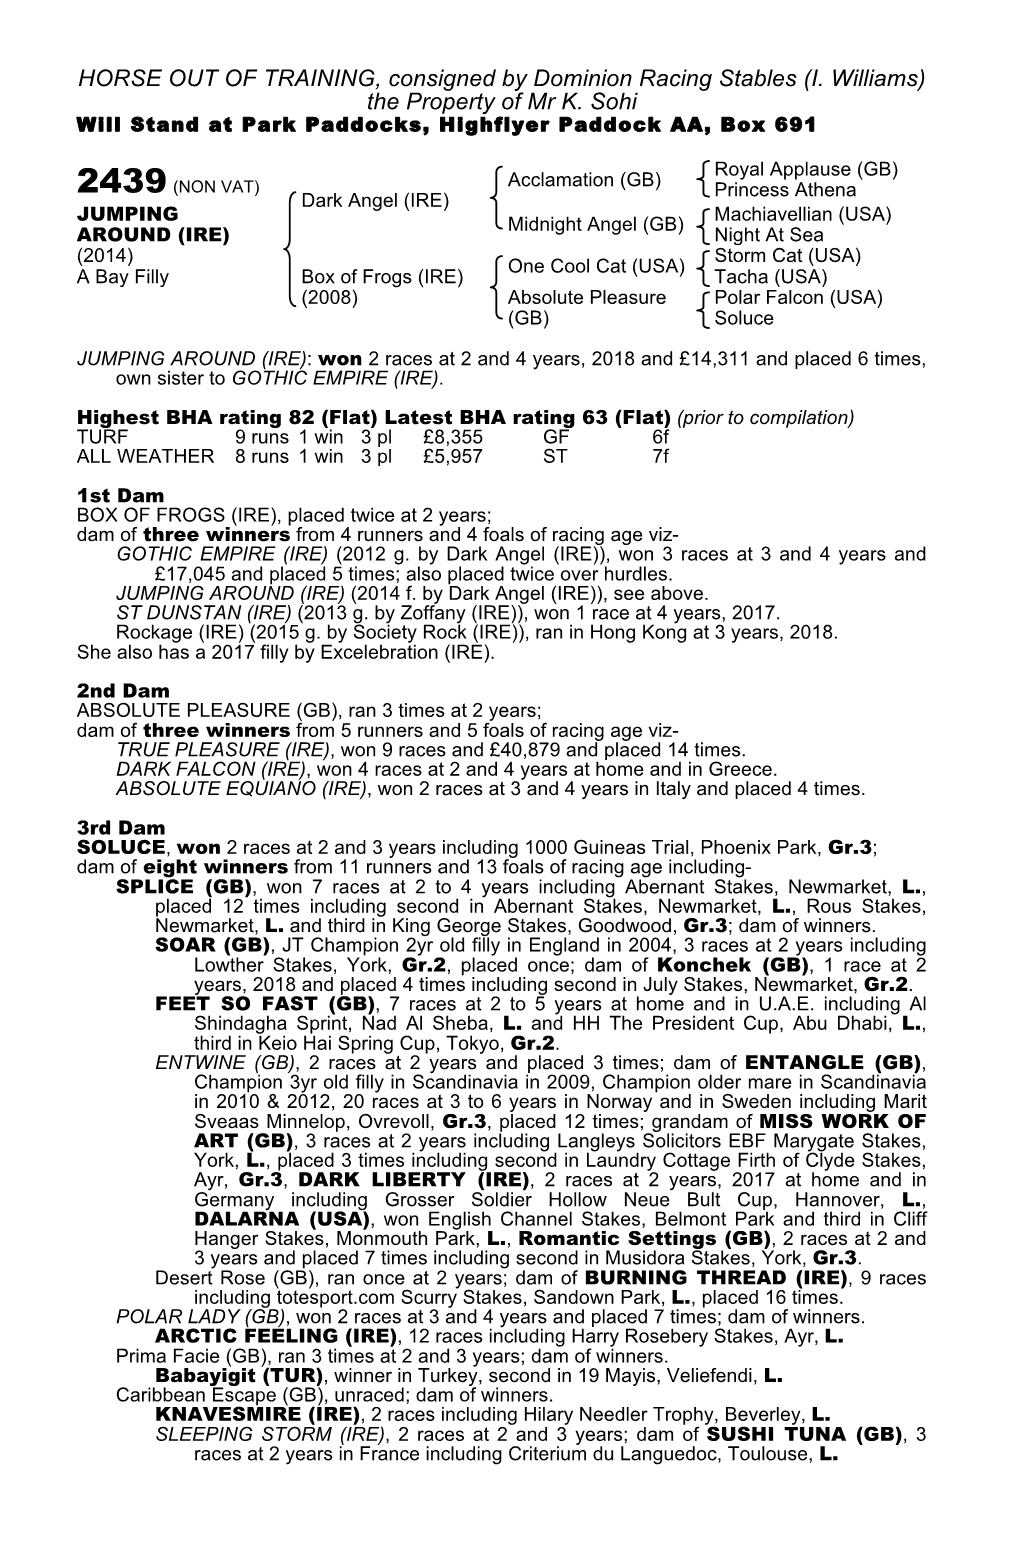 HORSE out of TRAINING, Consigned by Dominion Racing Stables (I. Williams) the Property of Mr K. Sohi Will Stand at Park Paddocks, Highflyer Paddock AA, Box 691